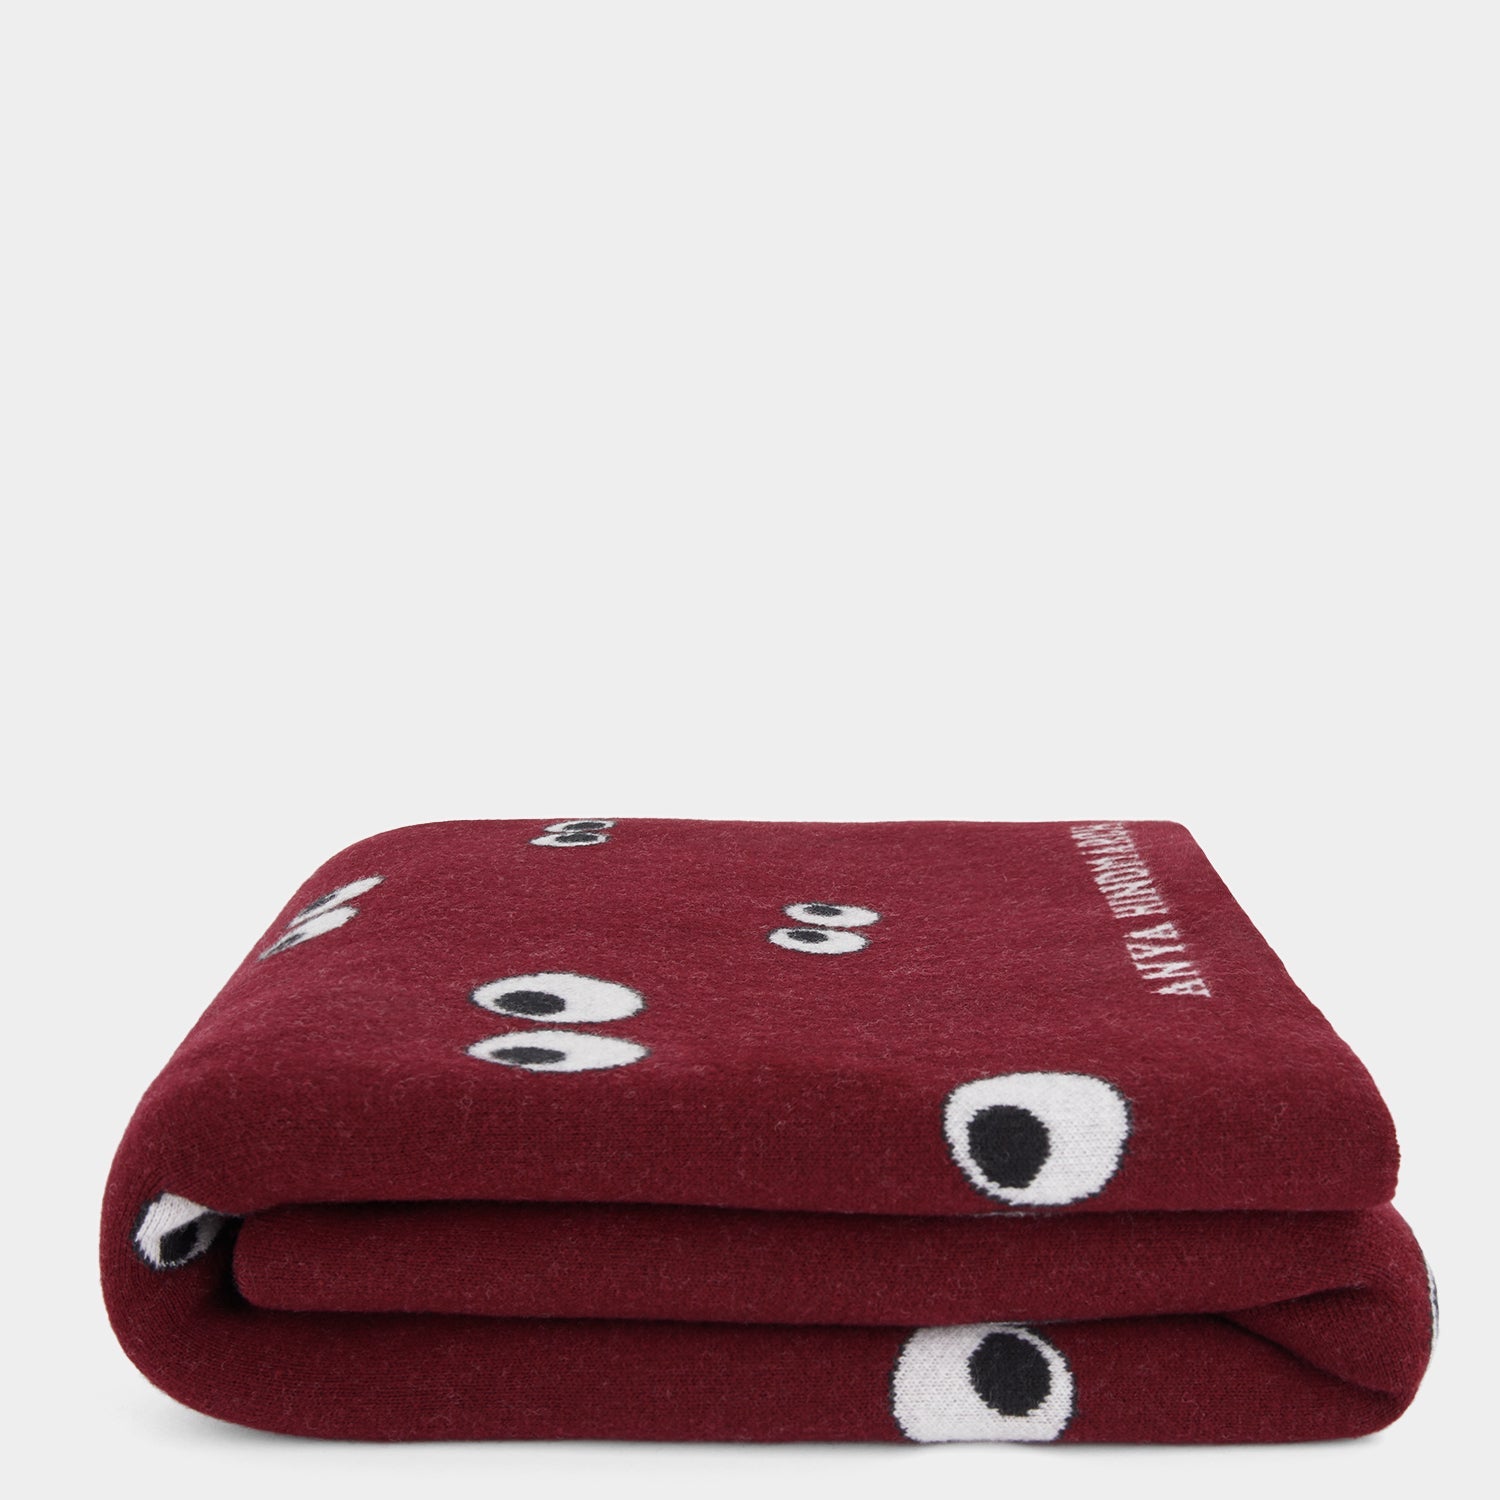 All Over Eyes Blanket -

                  
                    Lambswool in Medium Red -
                  

                  Anya Hindmarch US
